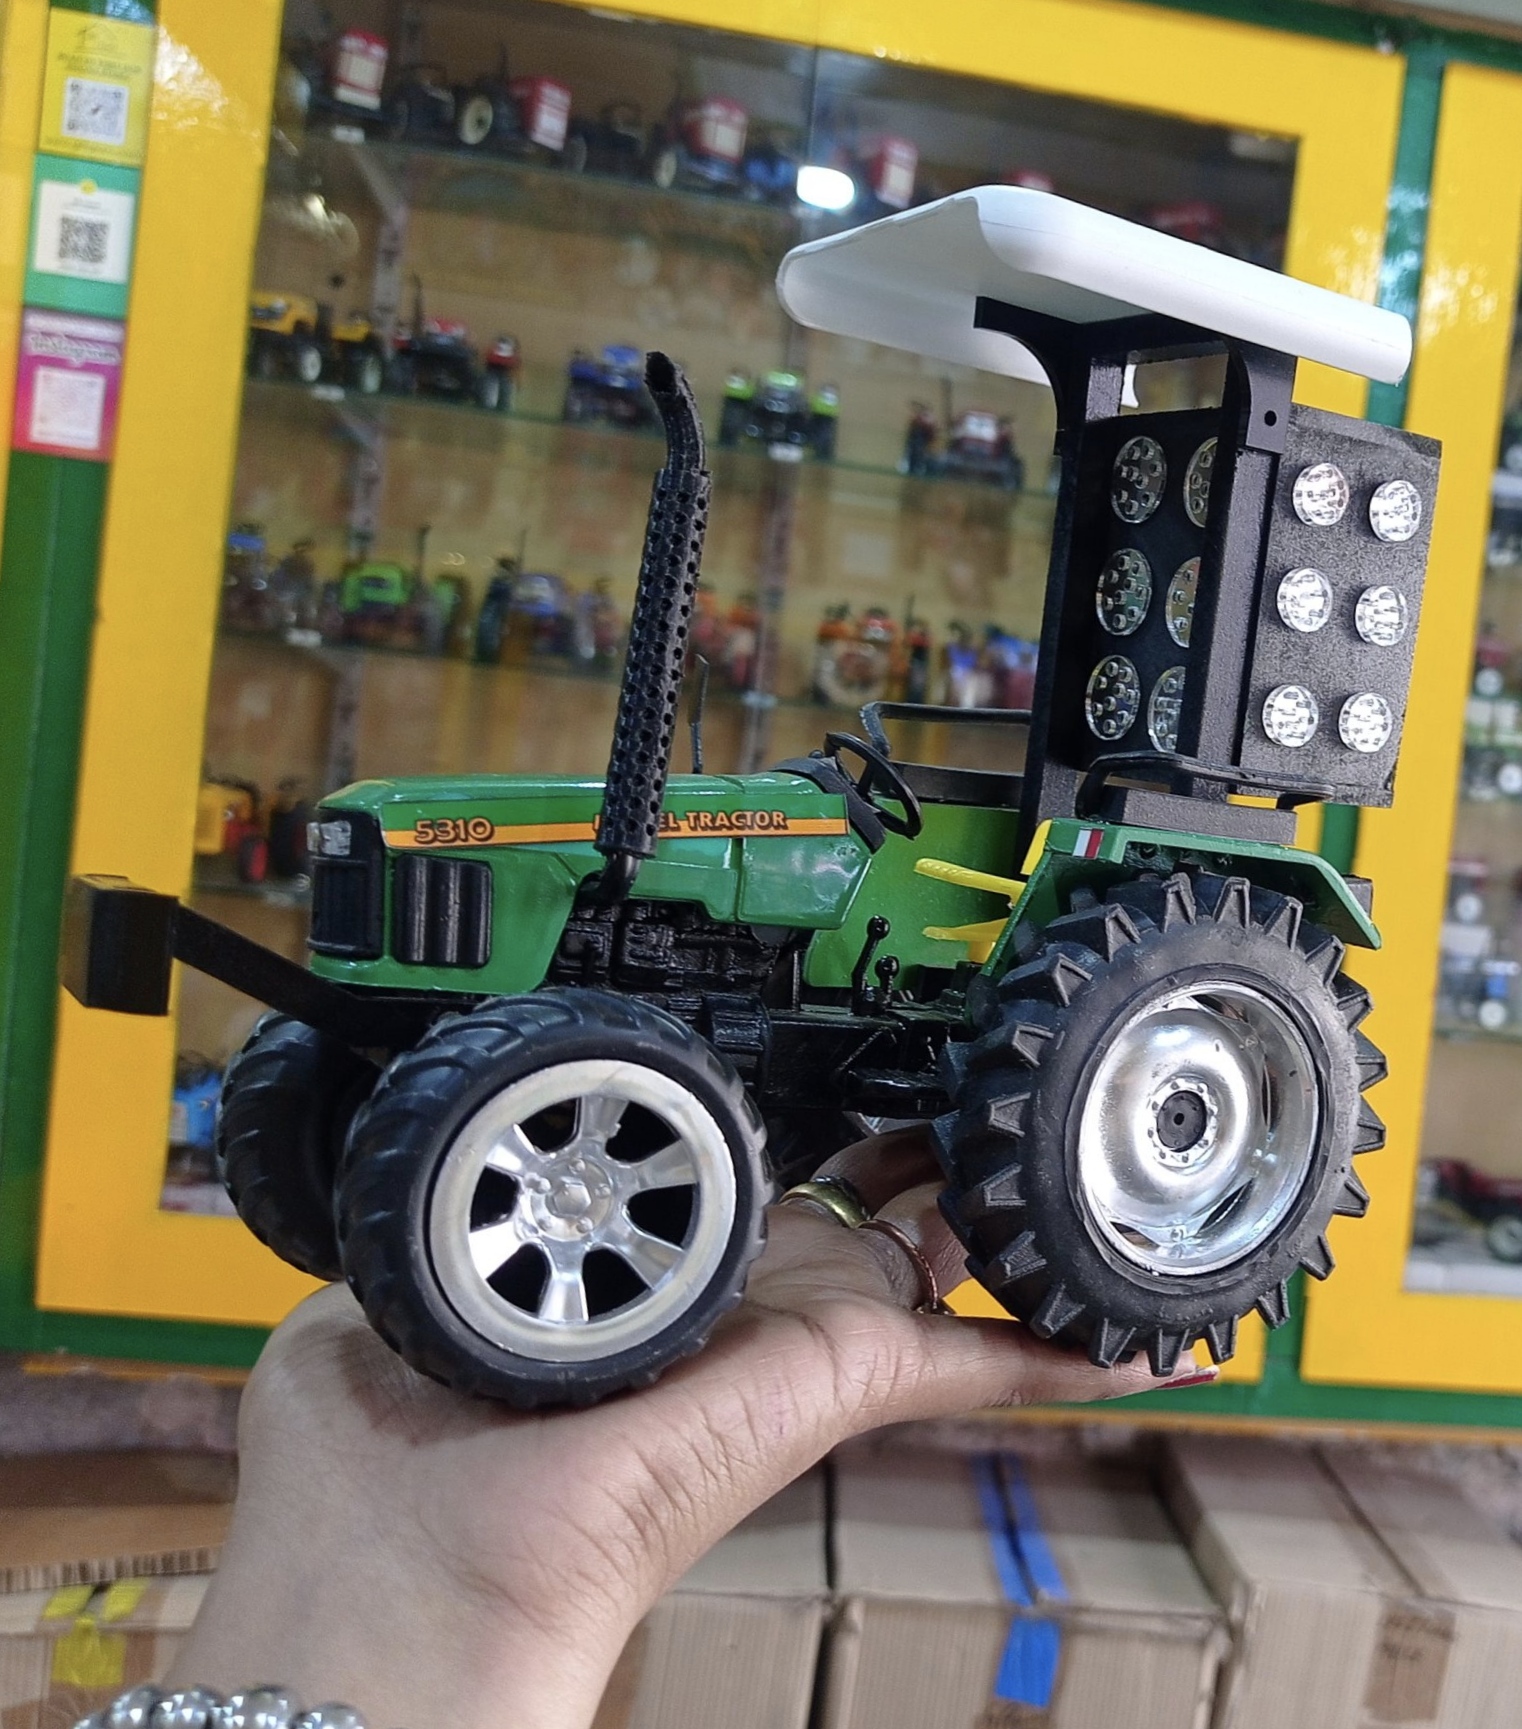 5310 Modified Model Tractor Gift House